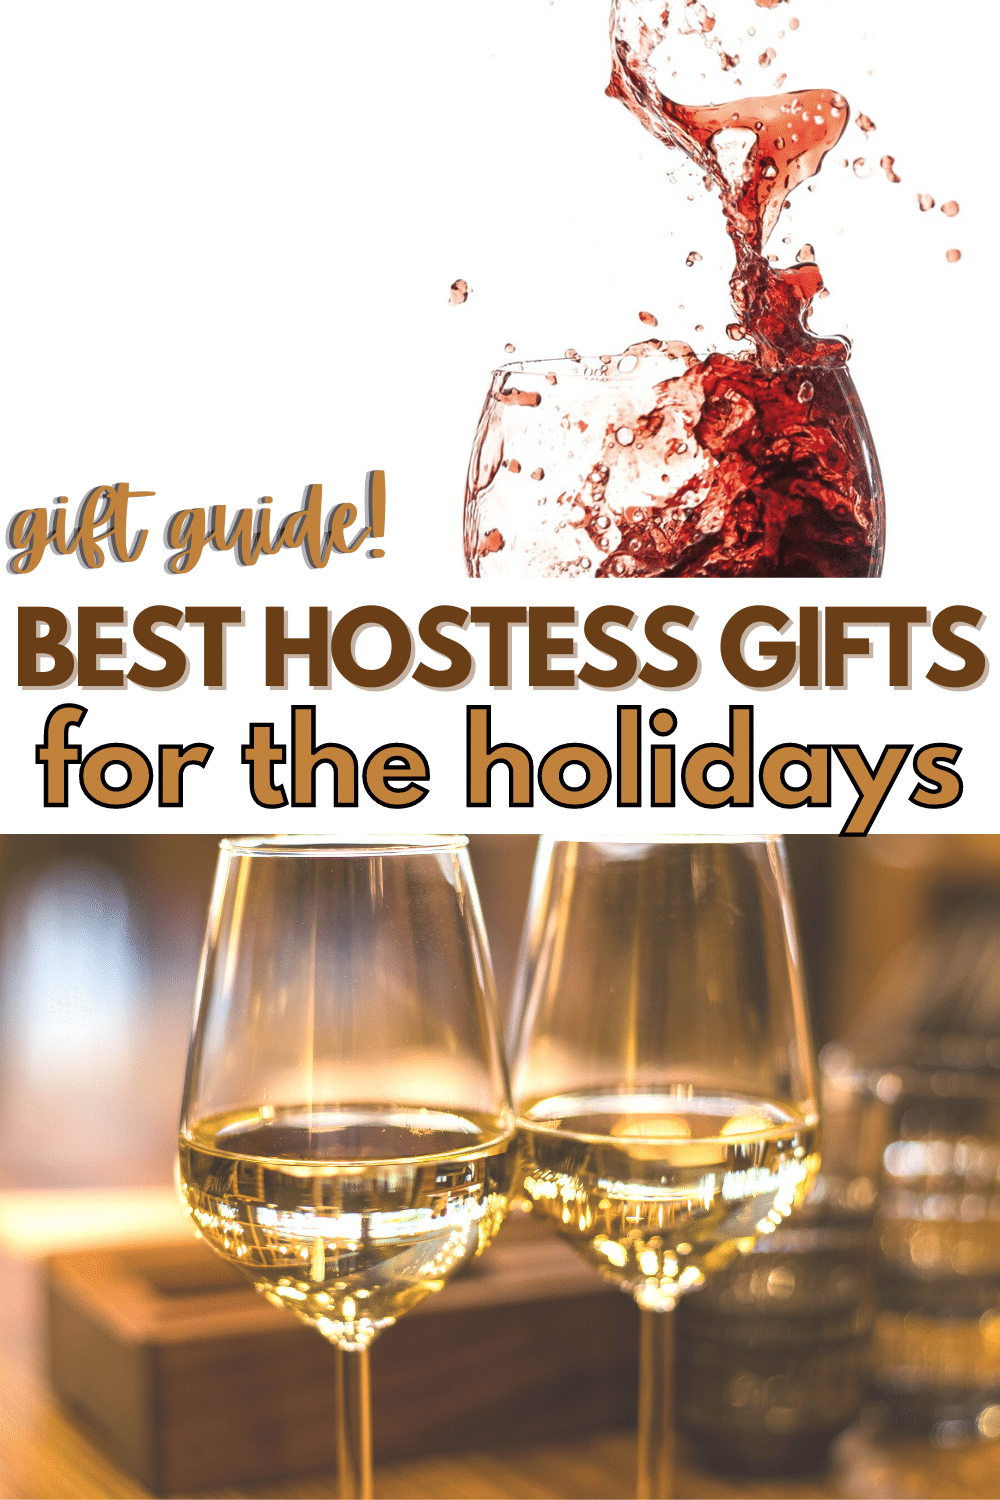 With the holidays approaching, you've likely got a full social calendar with lots of parties. Here are some ideas for the best hostess gifts. #giftguide #giftideas #hostessgift via @wondermomwannab